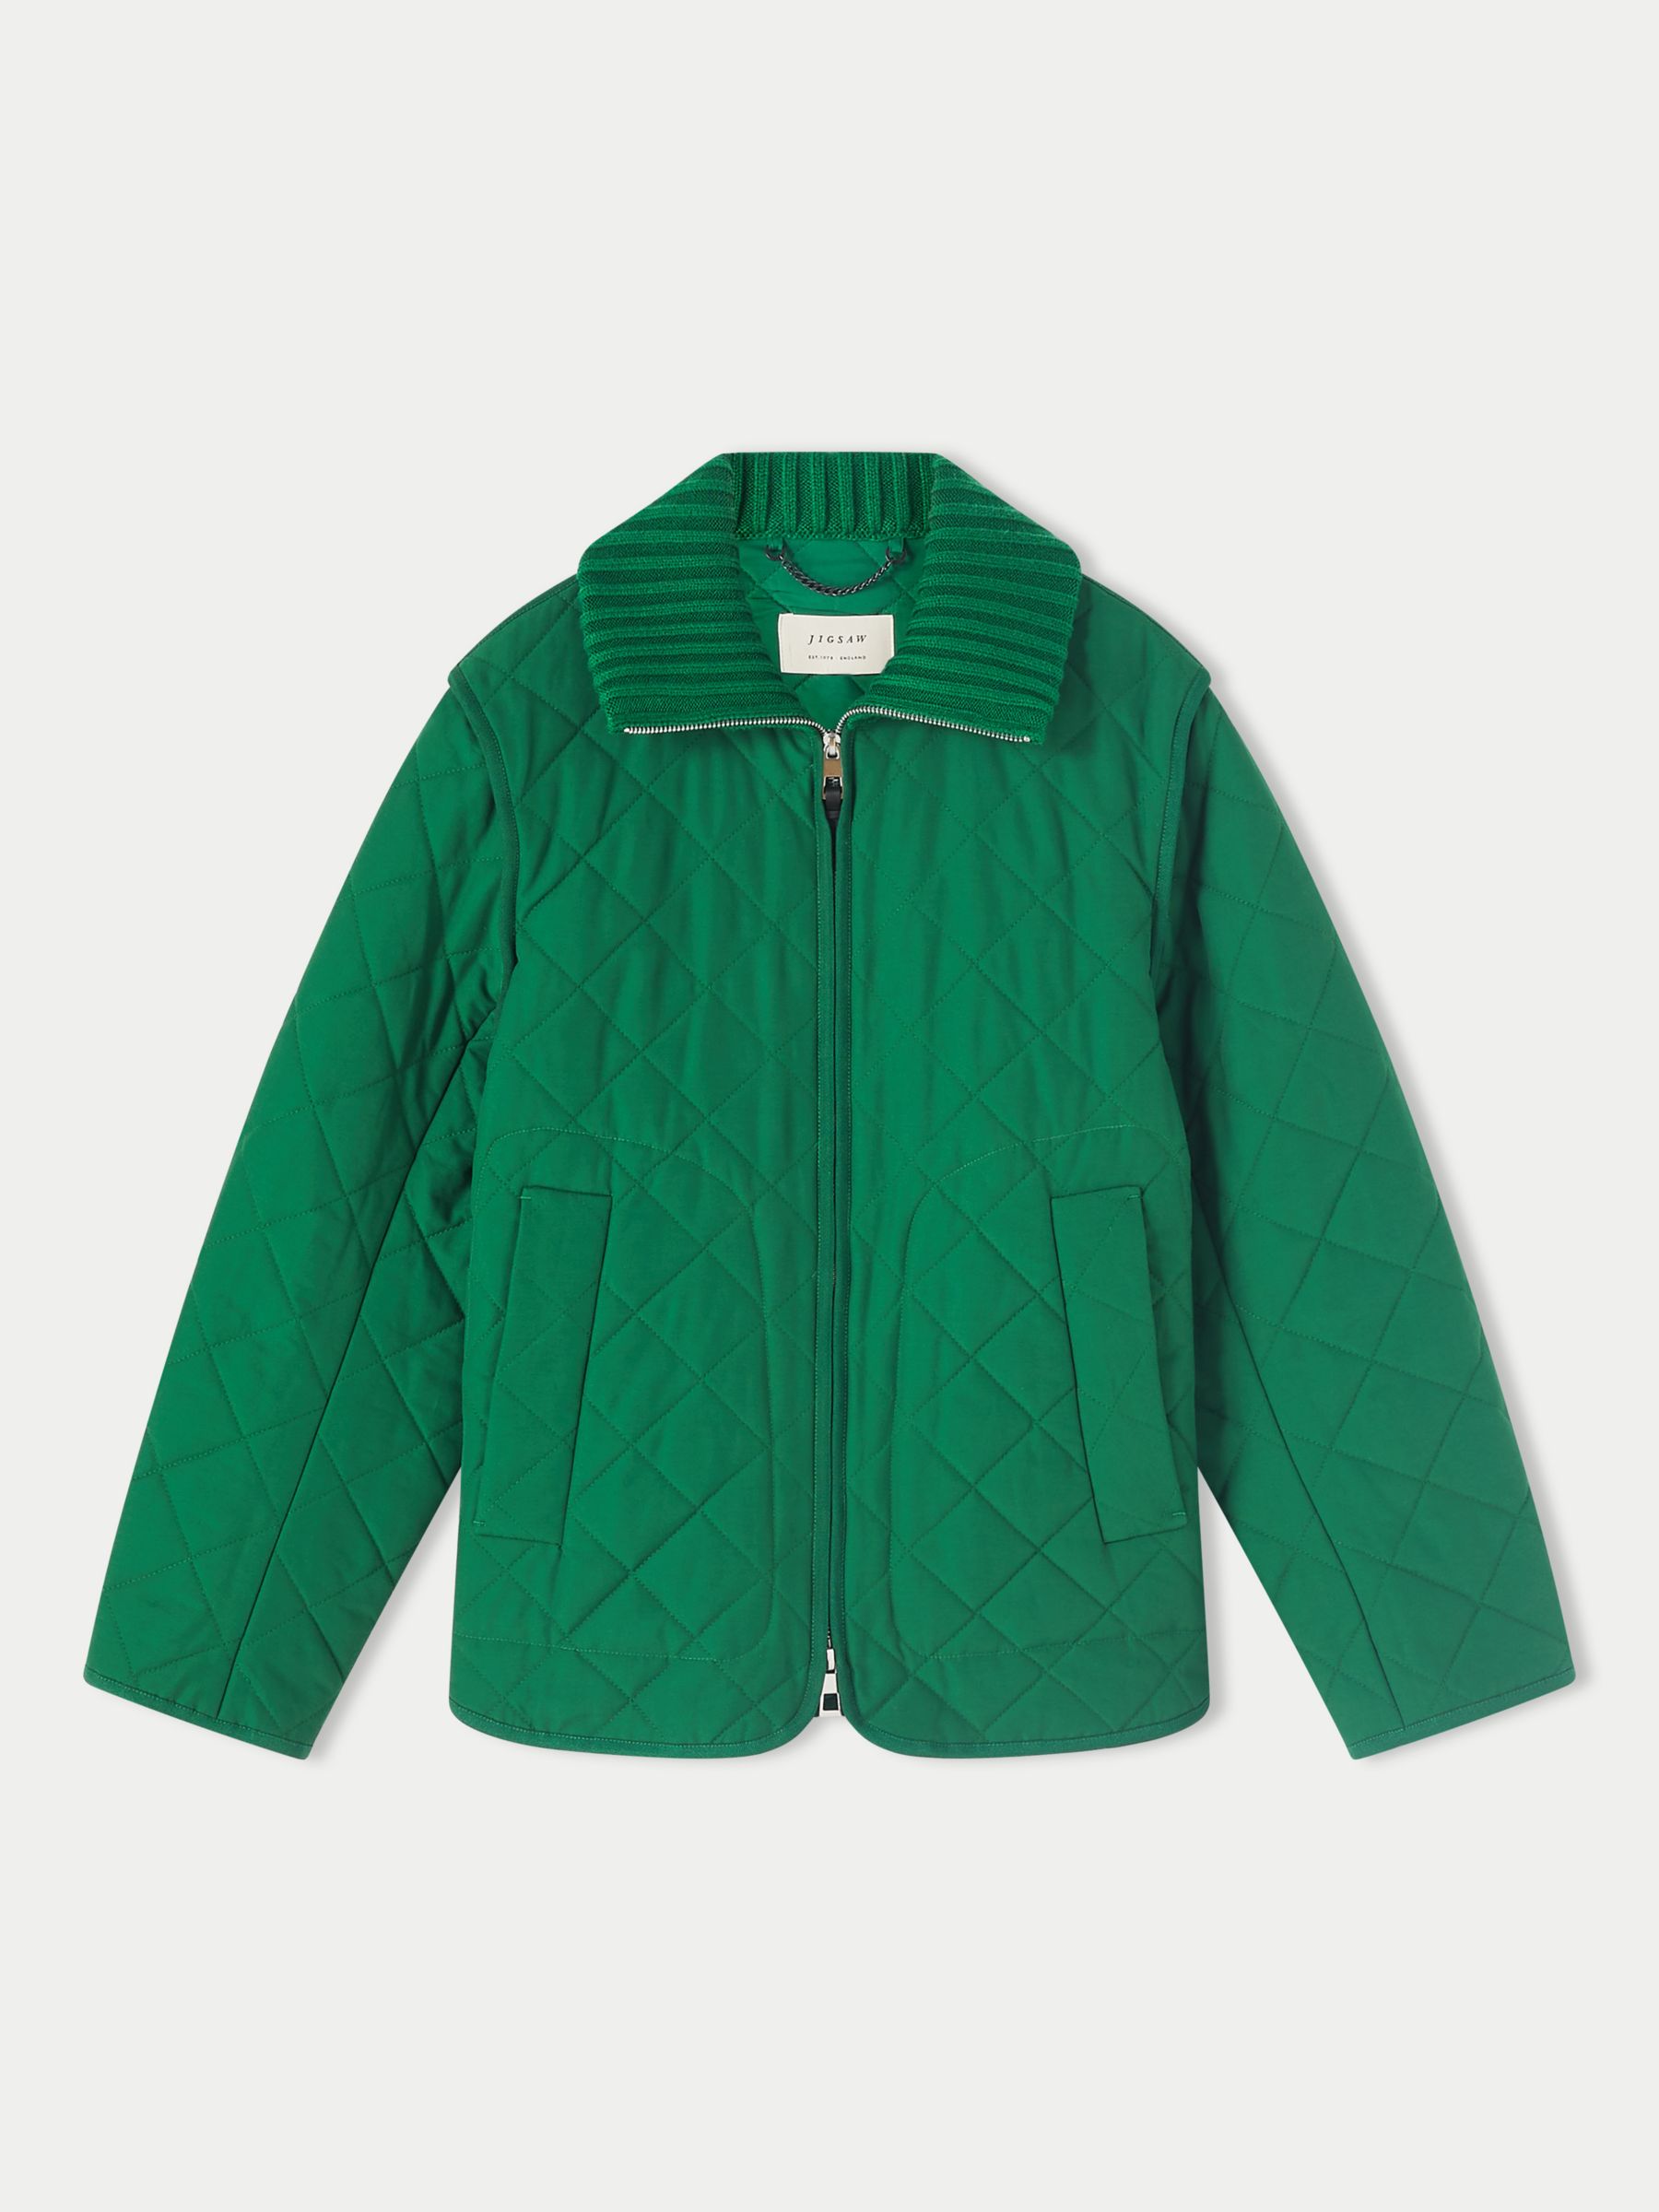 Jigsaw Knit Collar Quilted Jacket, Green at John Lewis & Partners